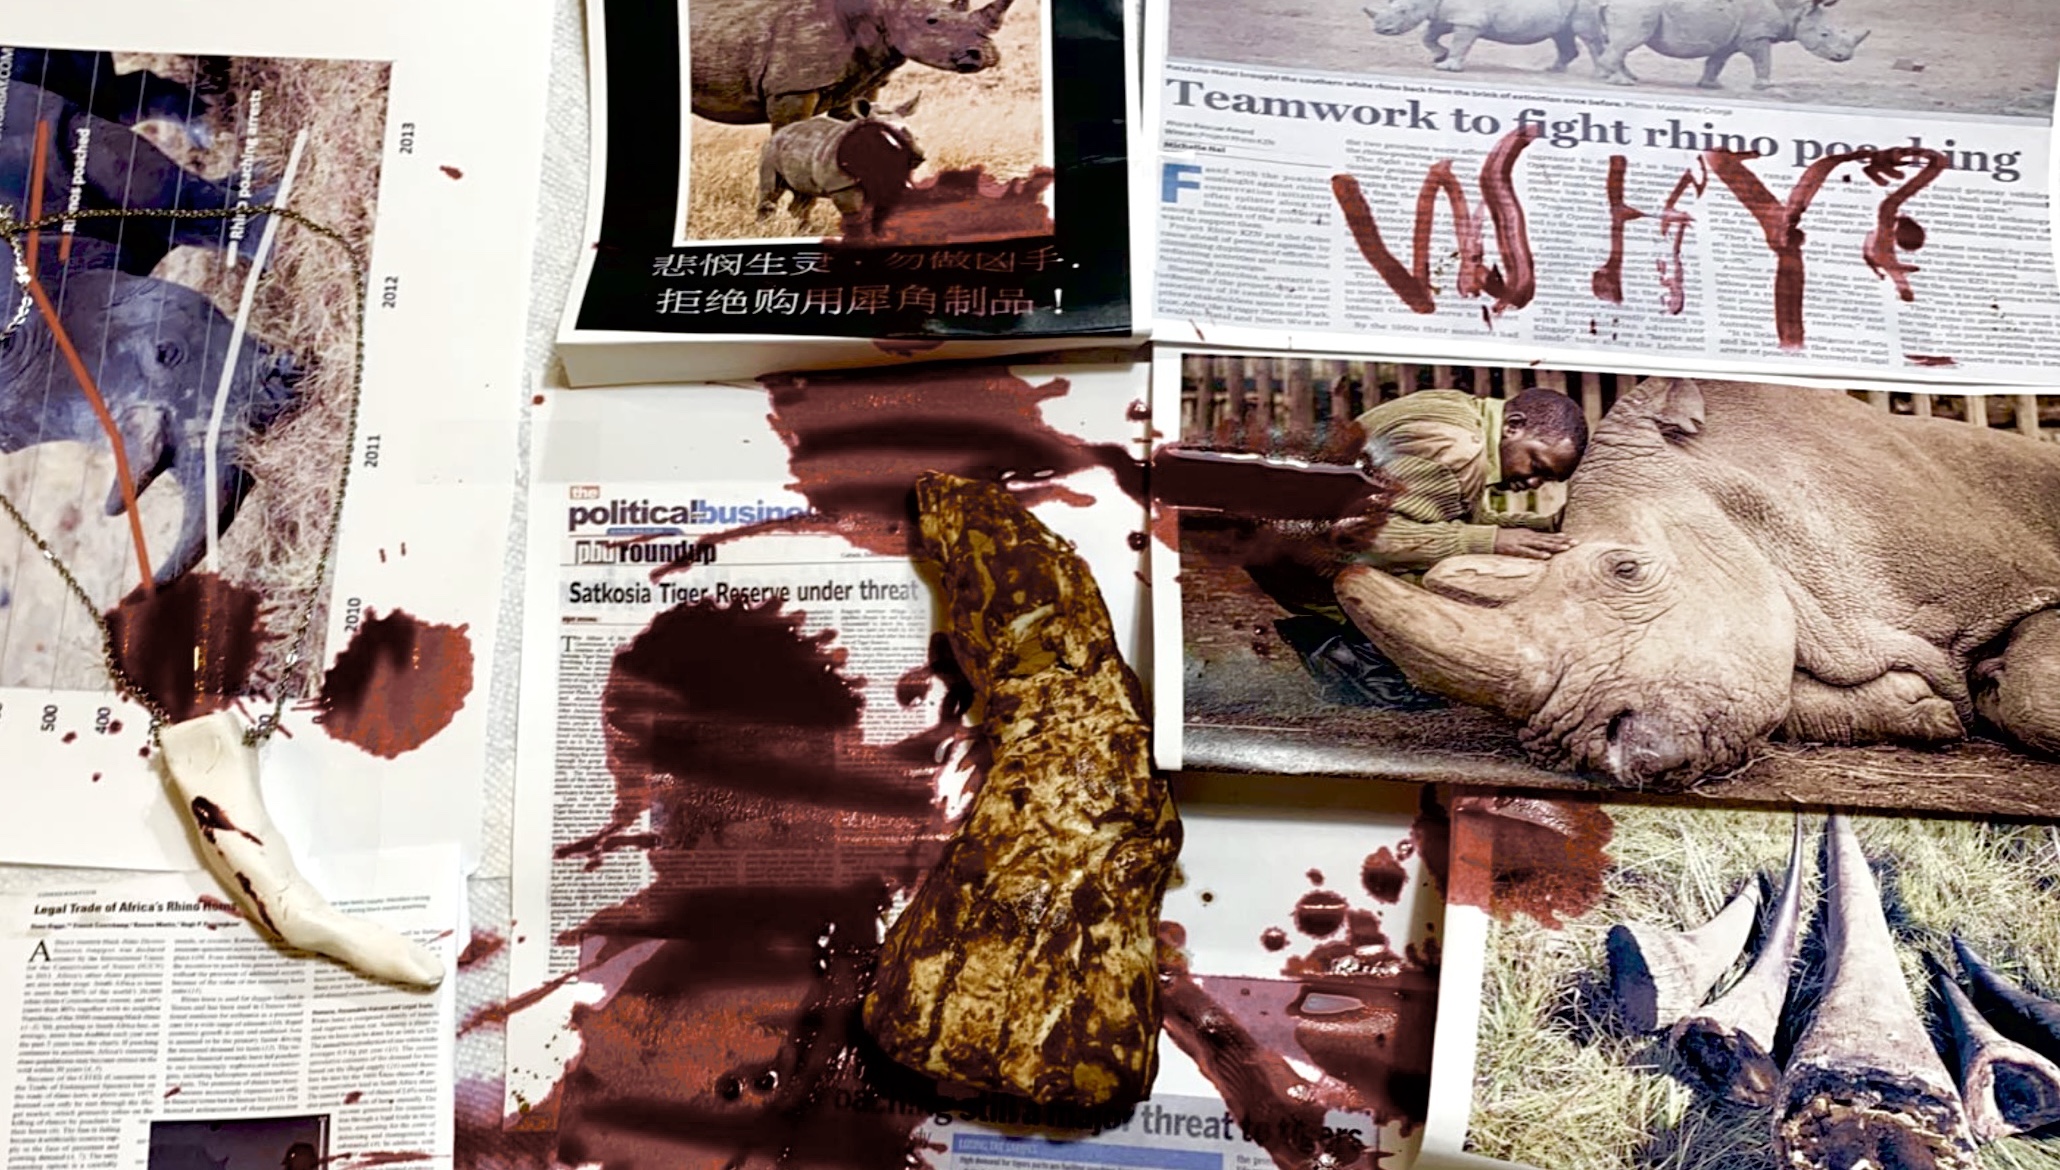 photos of bloodied animals